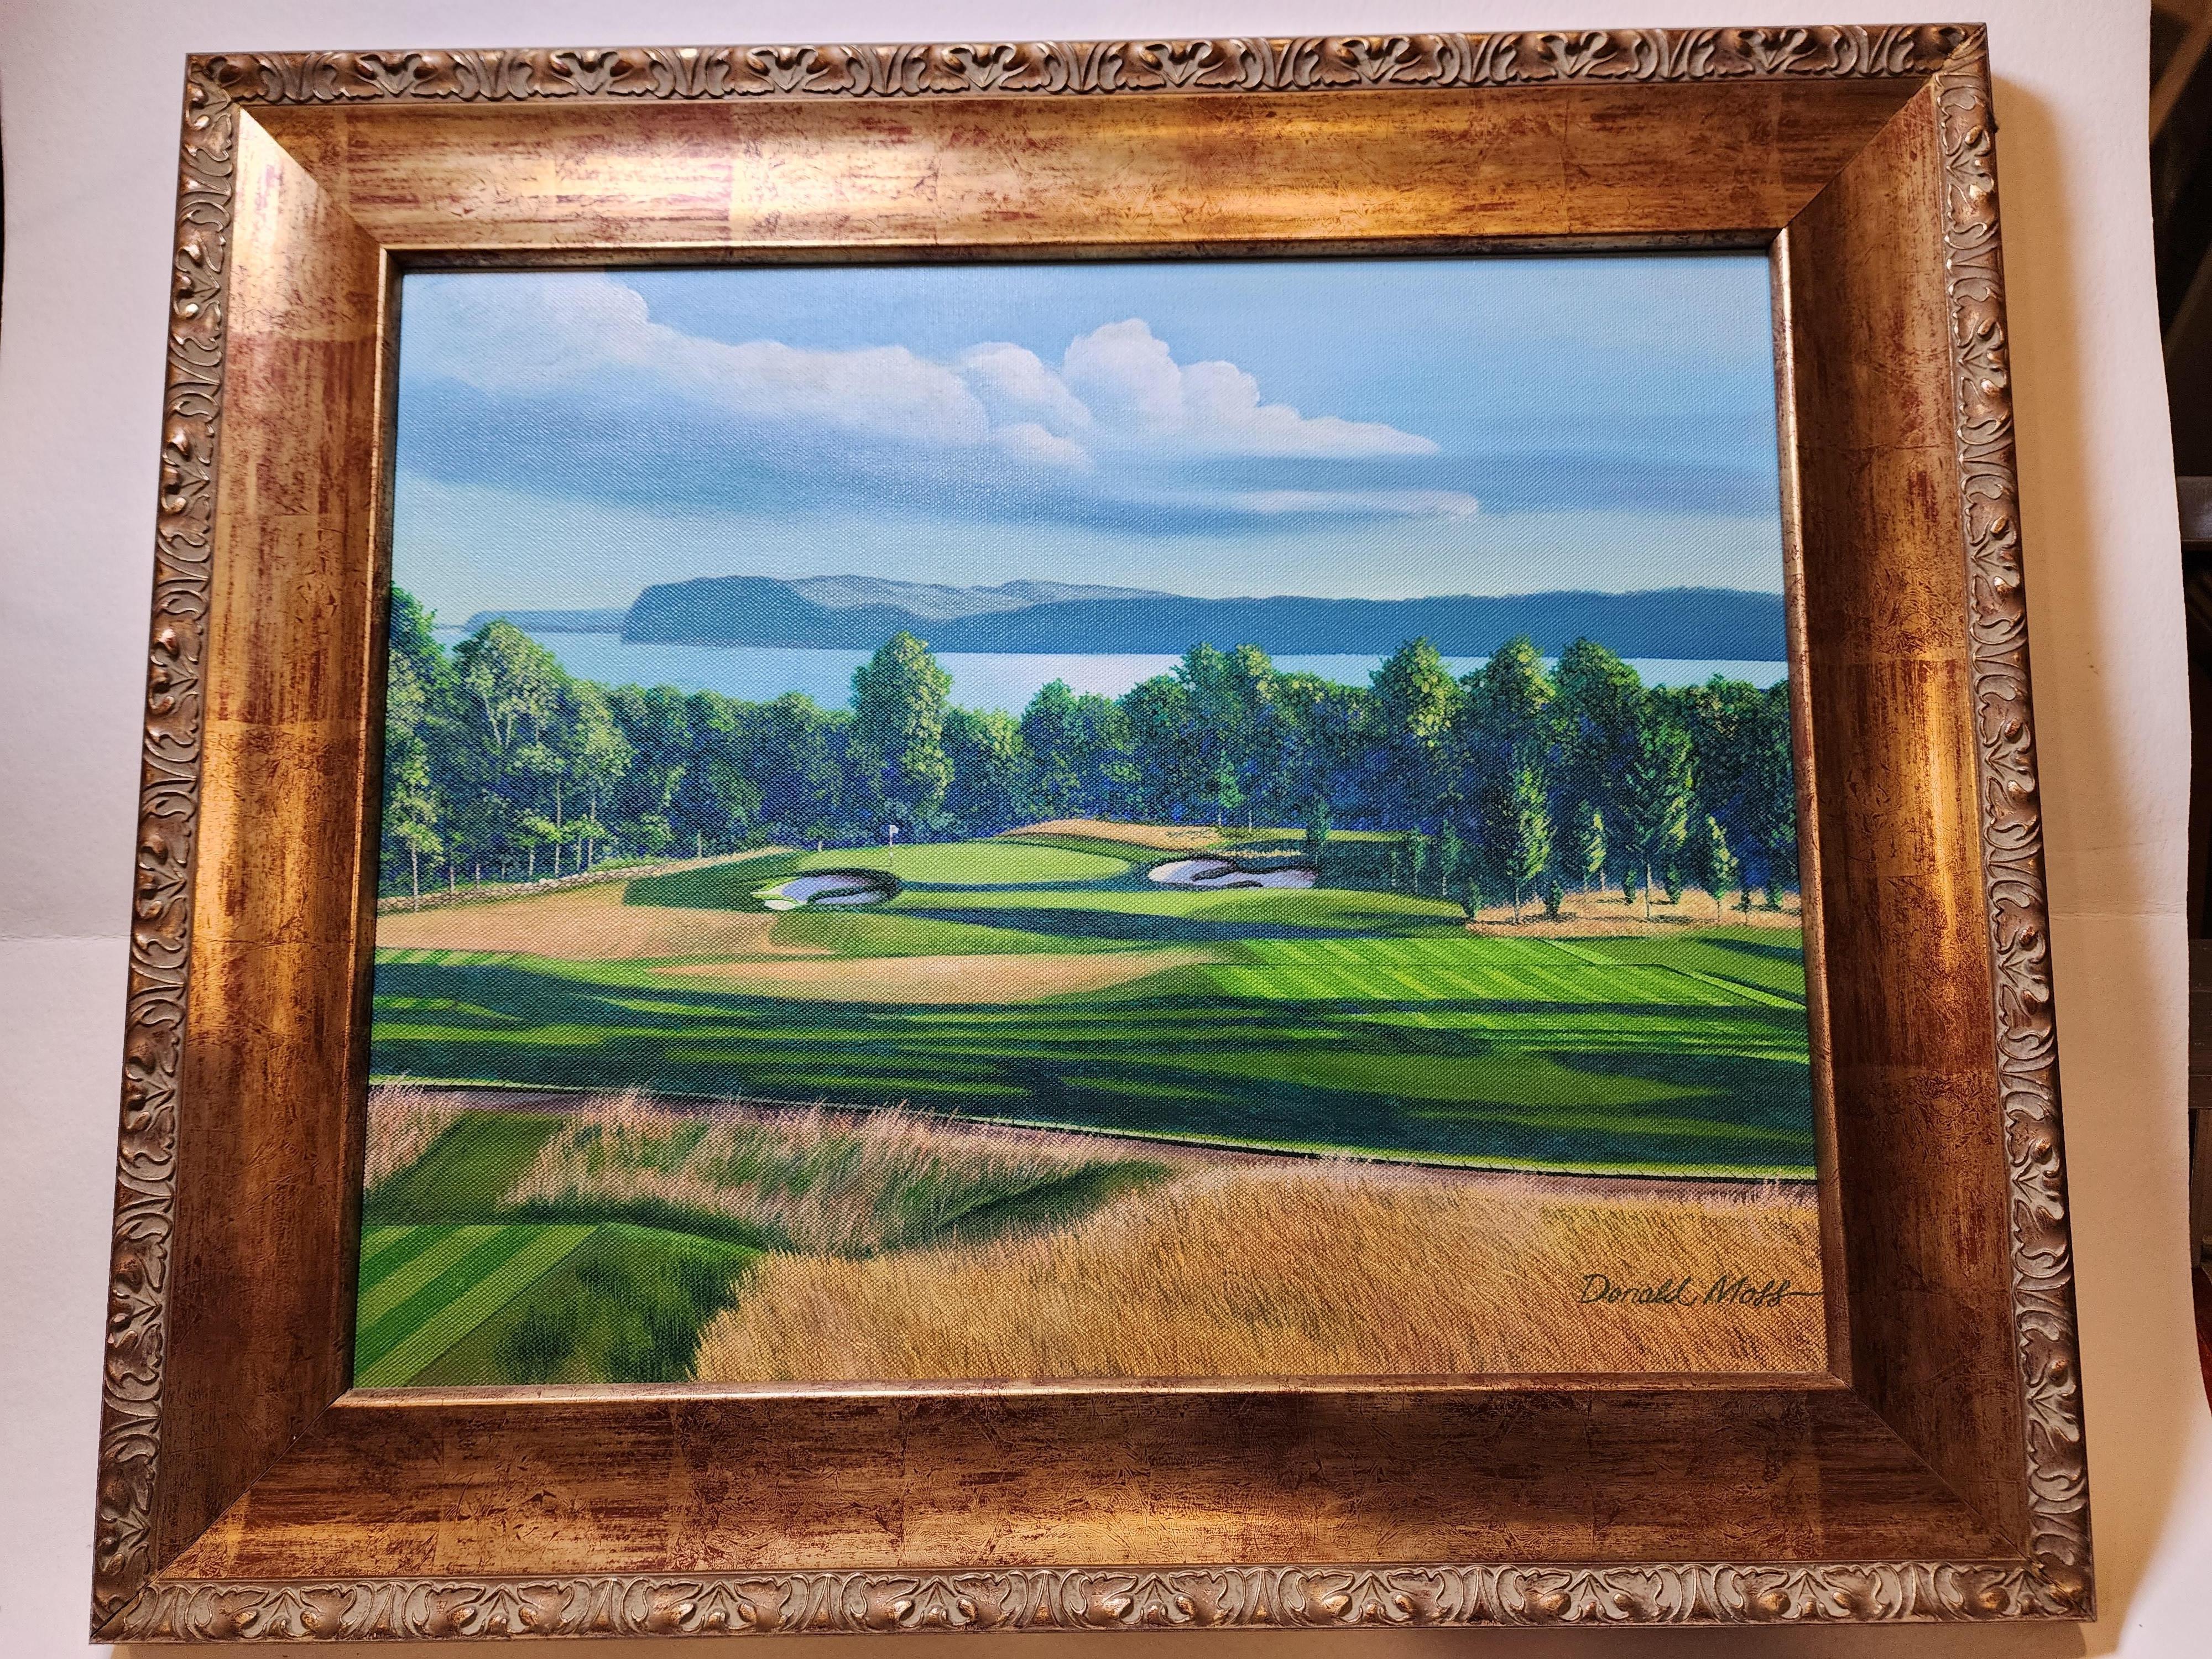 #16 Croton on Hudson County Club.
Beautifully rendered golf view by illustrator Donald Moss.
He is well known for his golf views and many have been made into offset lithographic prints.
Your chance to own an original!